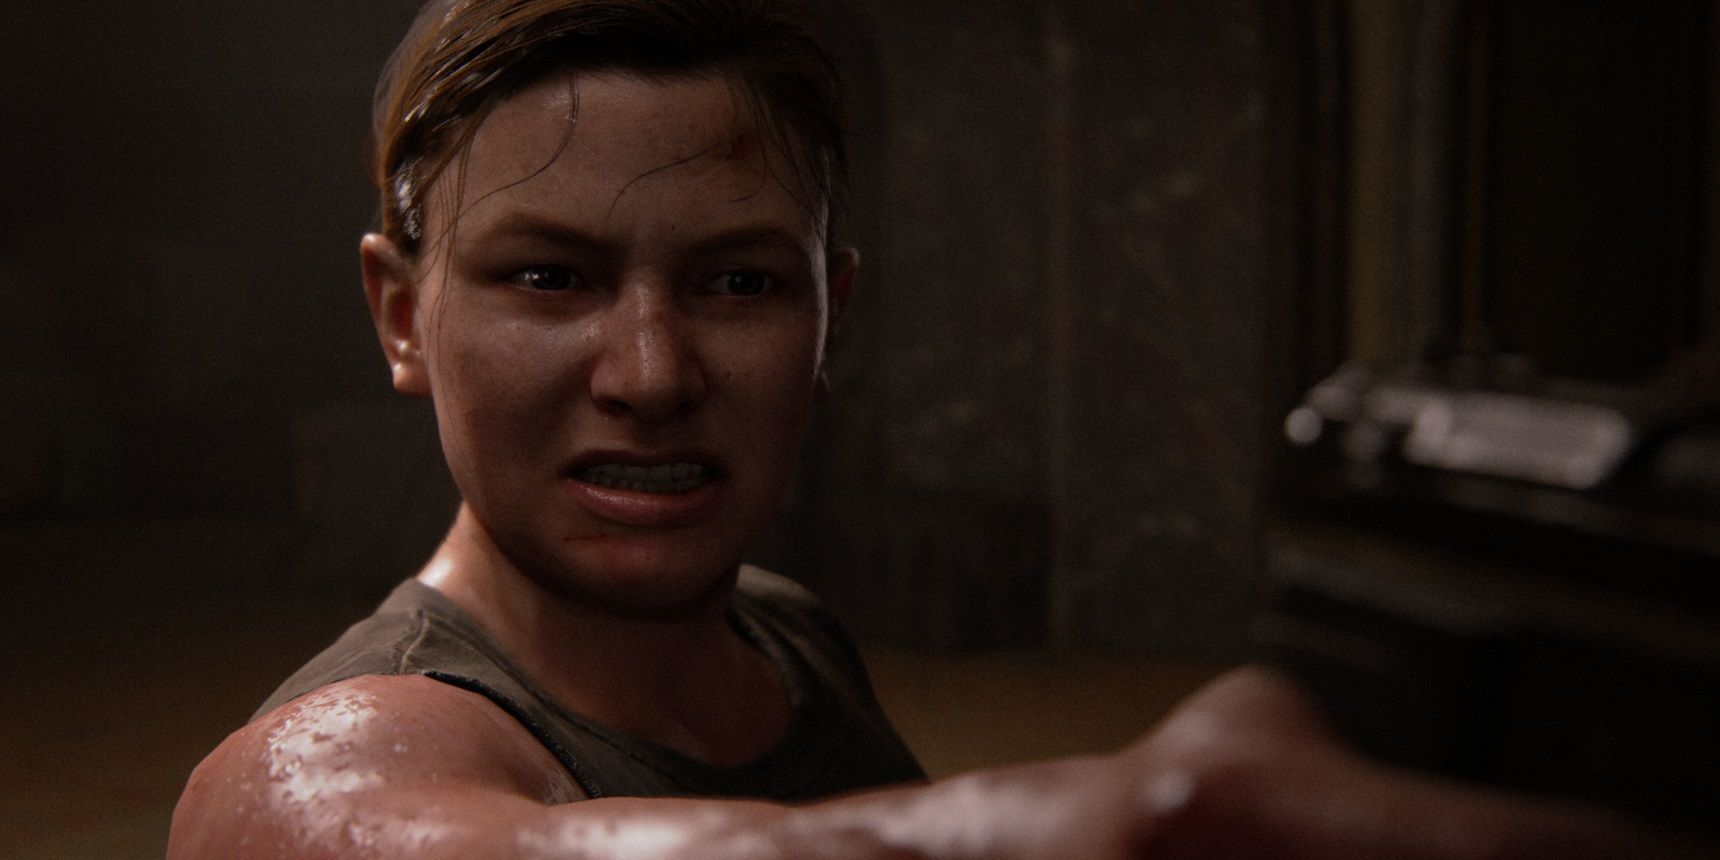 The Last of Us' Season 2 Has Cast a Mystery Actor as Ripped,  Revenge-Seeking Abby